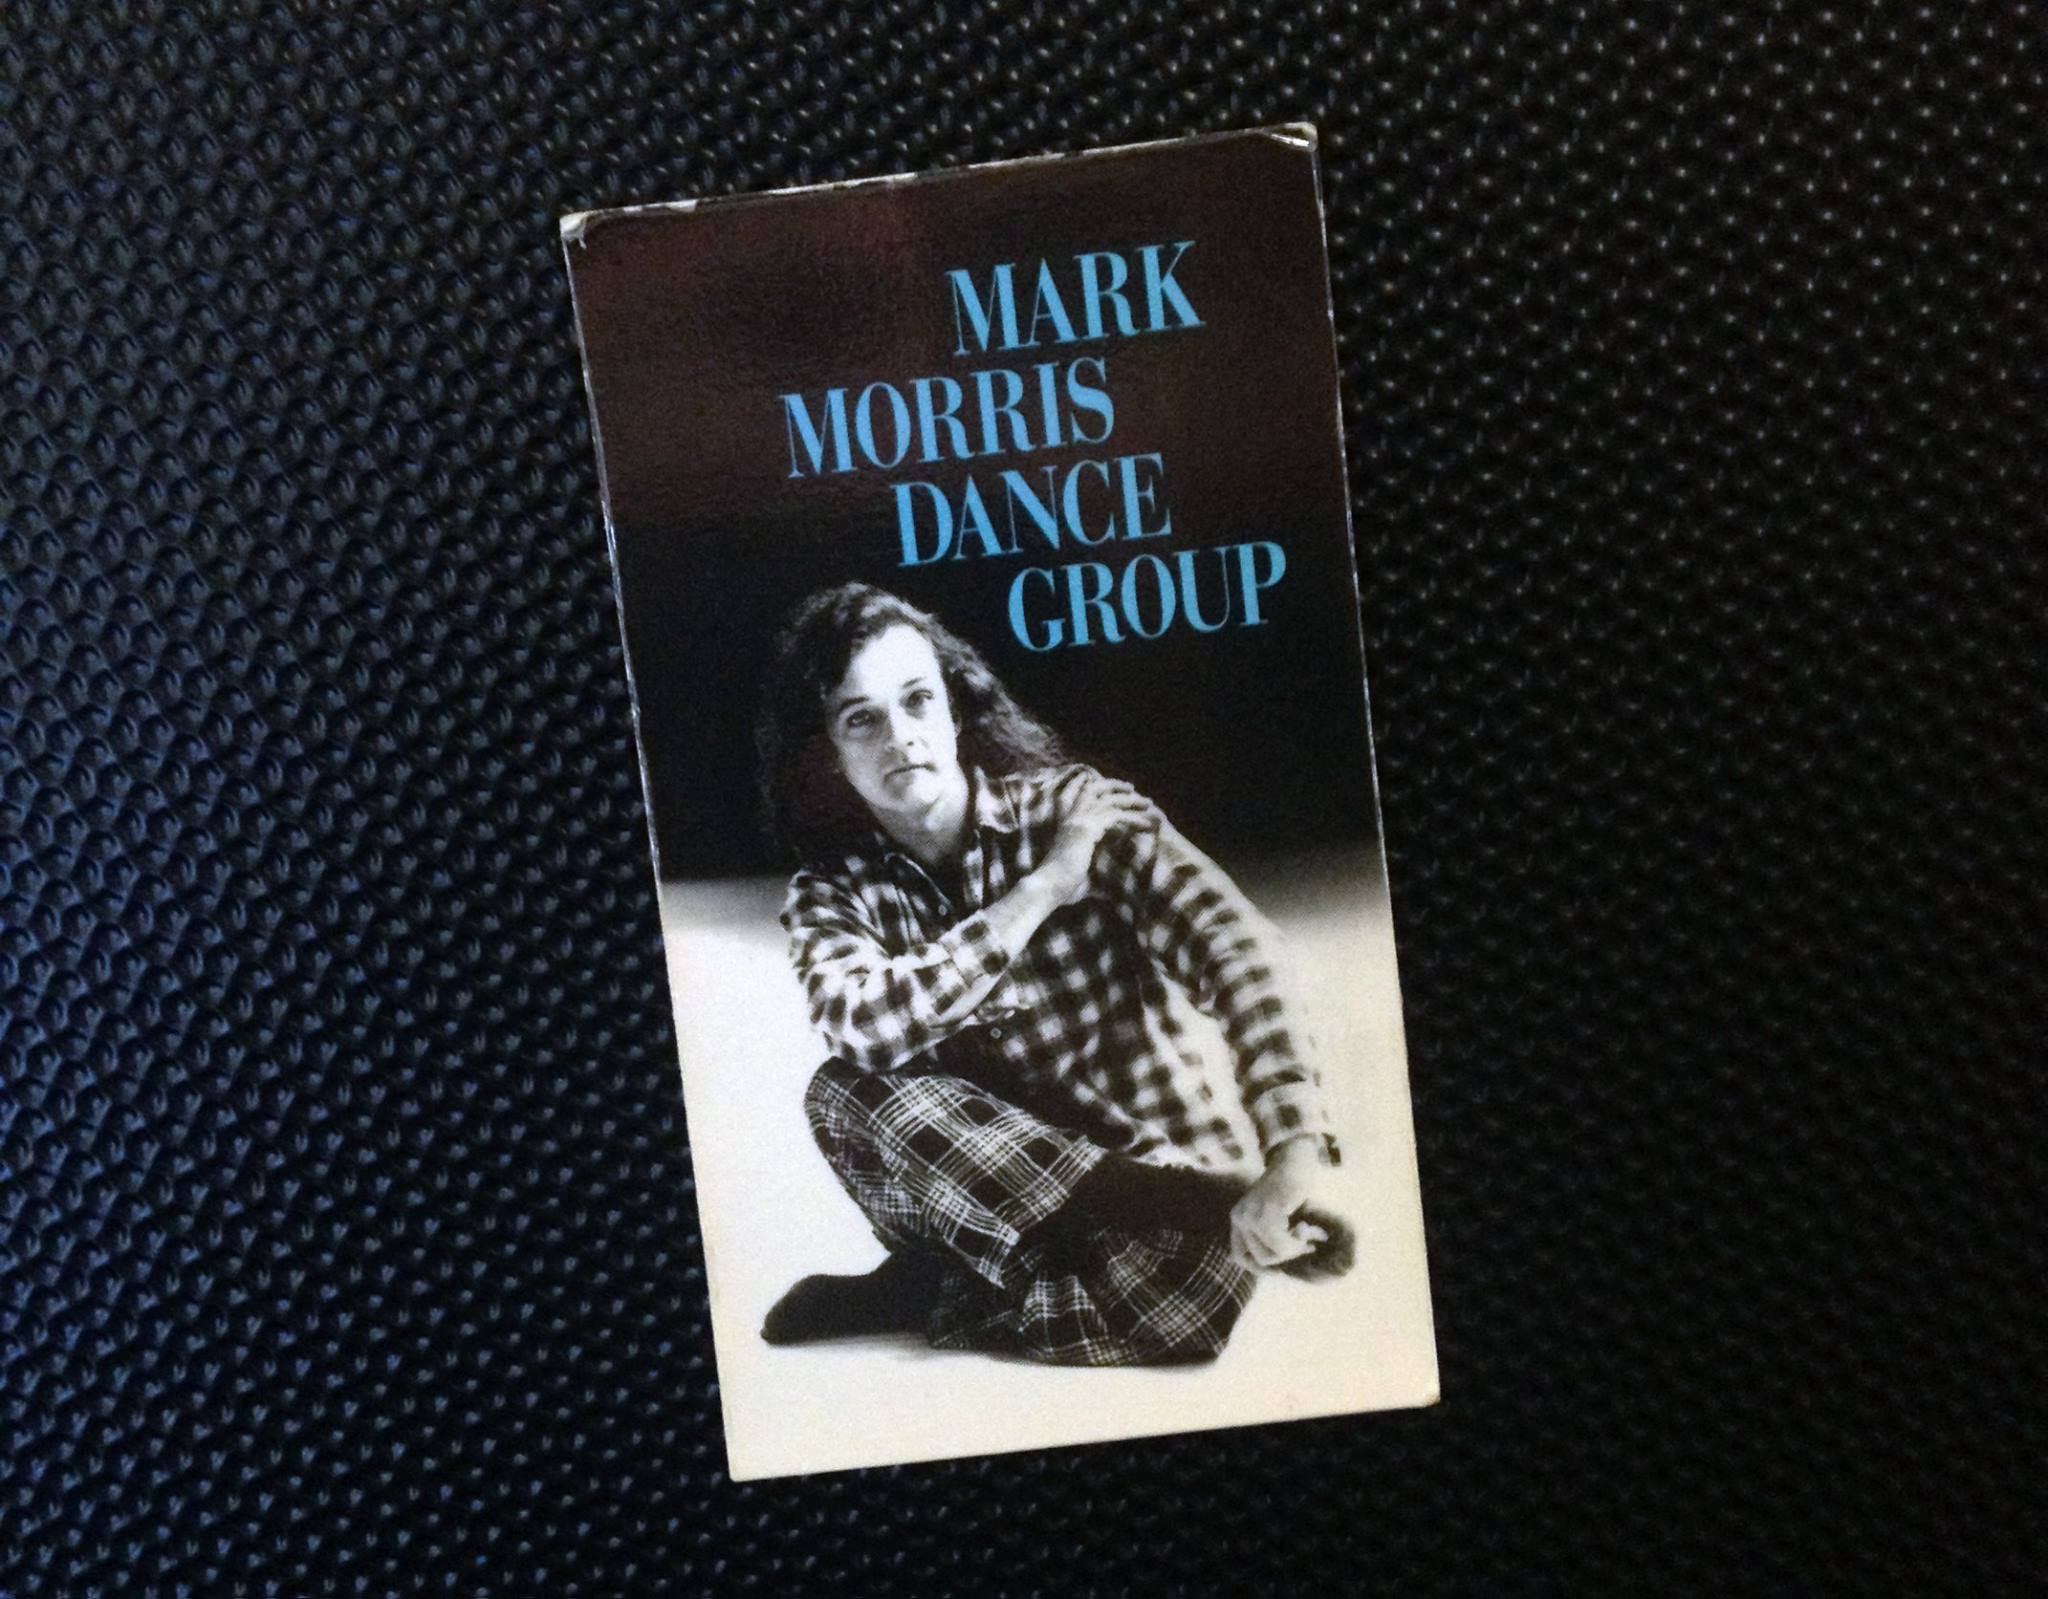 Happy birthday, Mark Morris (who happens to grace my very favorite refrigerator magnet)! 